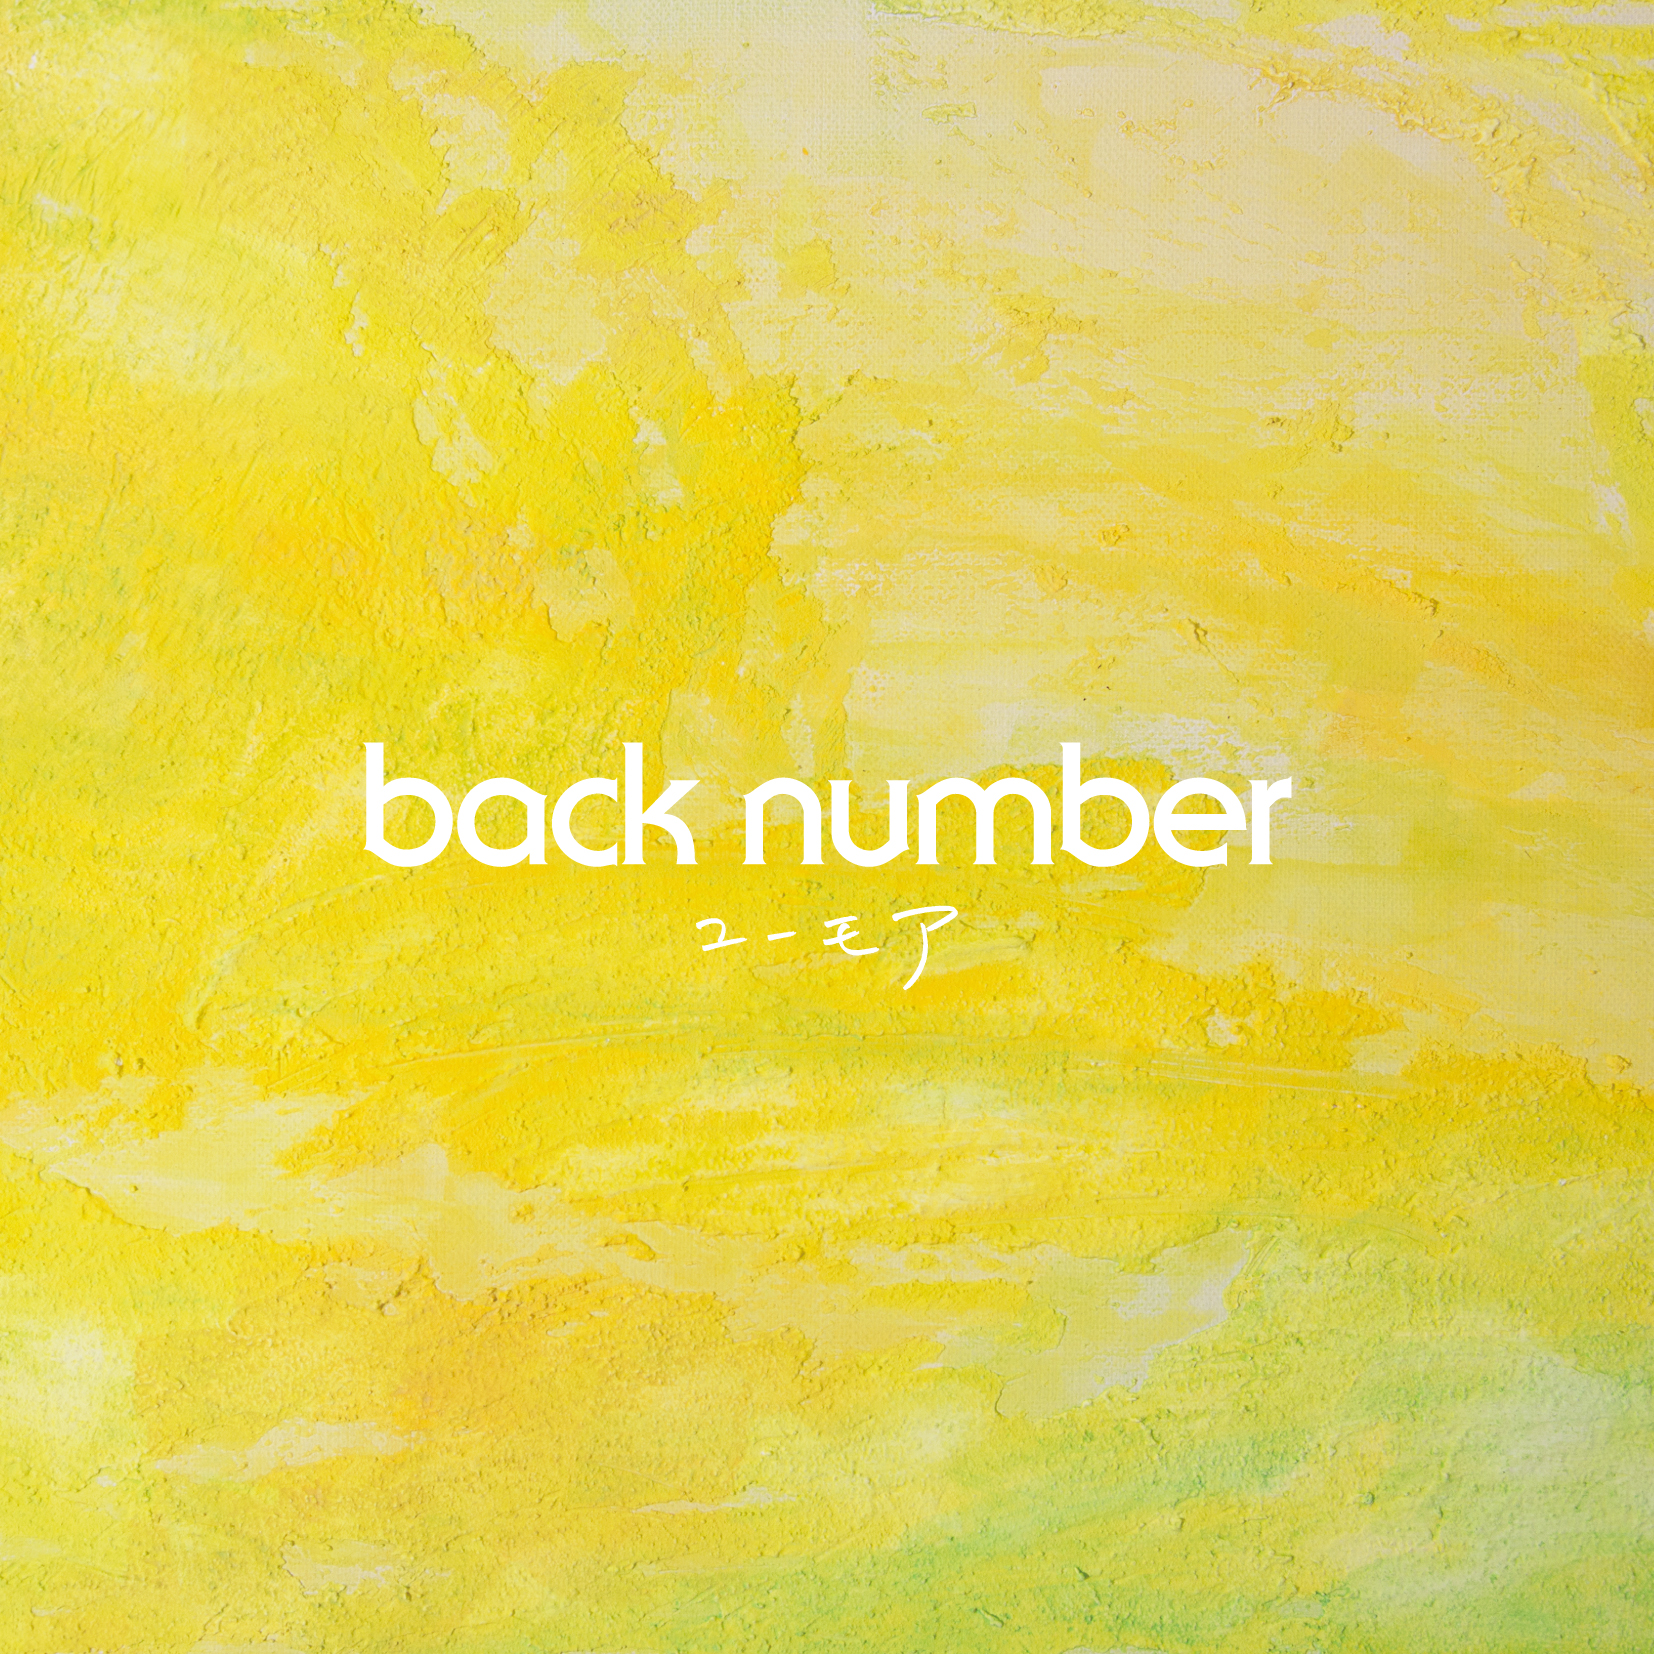 back number - ユーモア